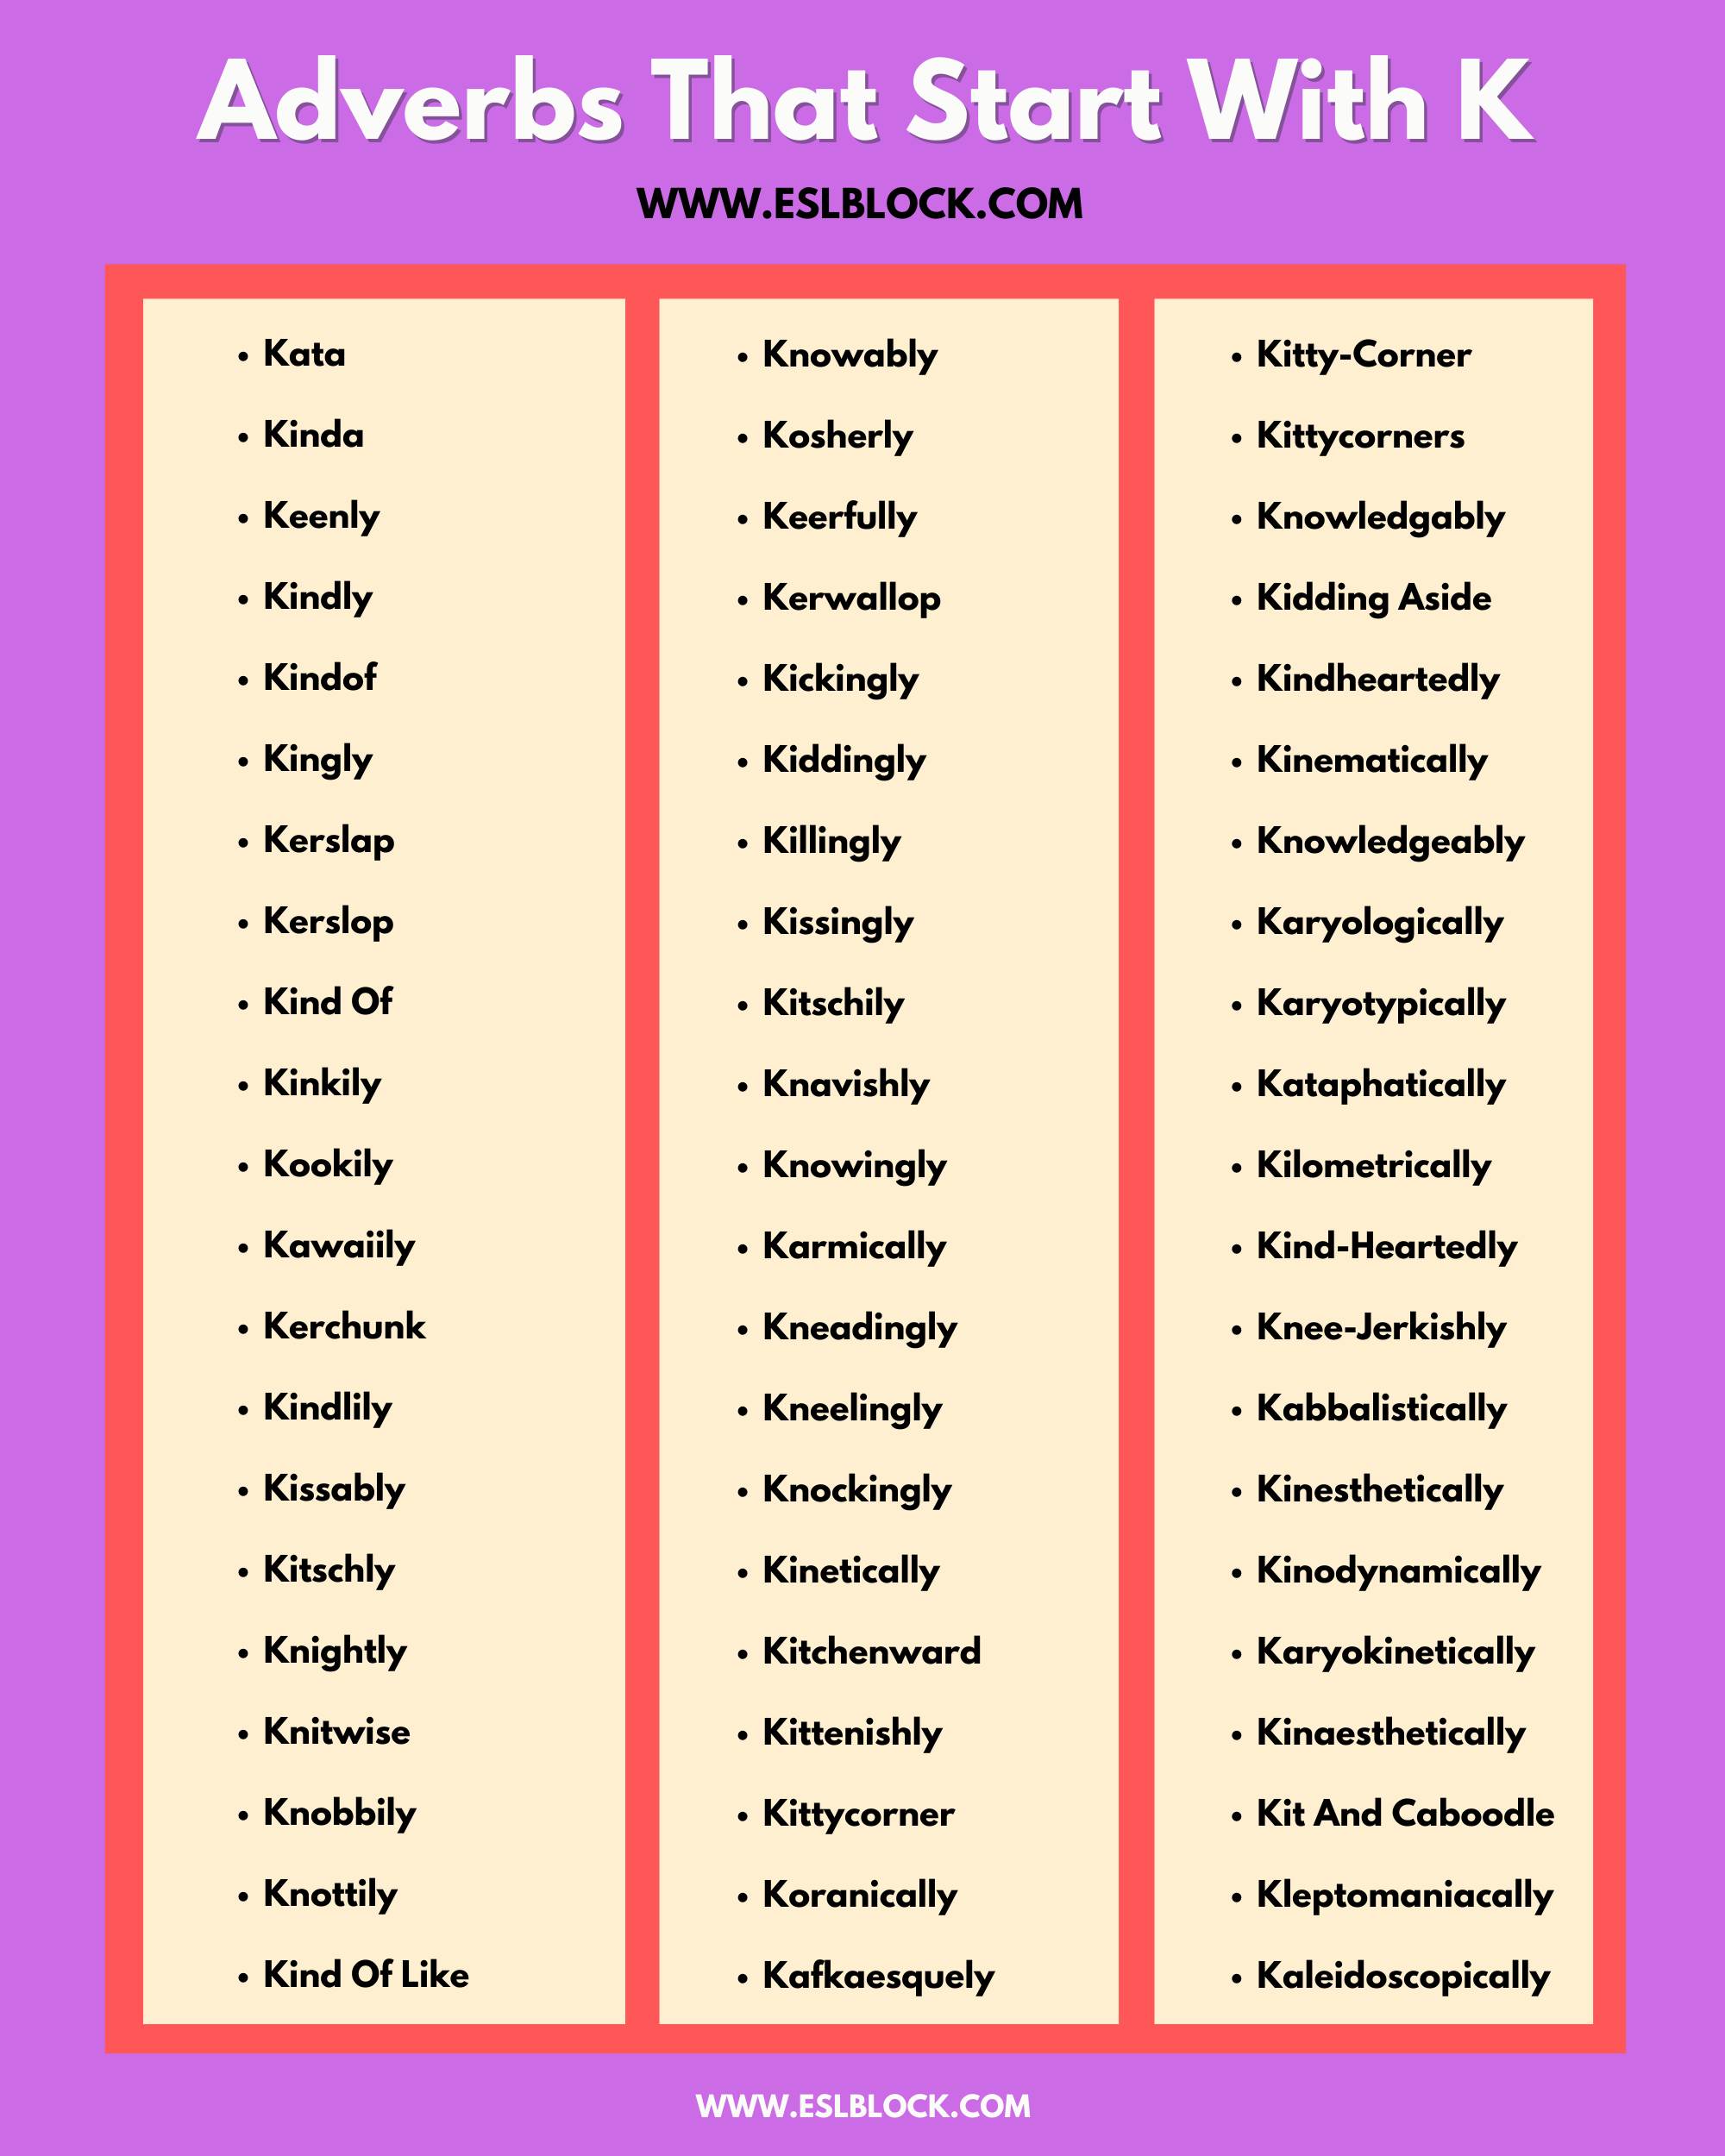 100 Example Sentences Using Adverbs, 4 Letter Adverbs That Start with K, 4 Letter Words, 5 Letter Adverbs That Start with K, 5 Letter Words, 6 Letter Adverbs That Start with K, 6 Letter Words, A to Z Adverbs, AA Adverbs, Adverb vocabulary words, Adverbs, Adverbs That Start with K, Adverbs with Example Sentences, All Adverbs, Types of Adverbs, Types of Adverbs with Example Sentences, Vocabulary, What are Adverbs, What are the types of Adverbs, Words That with K